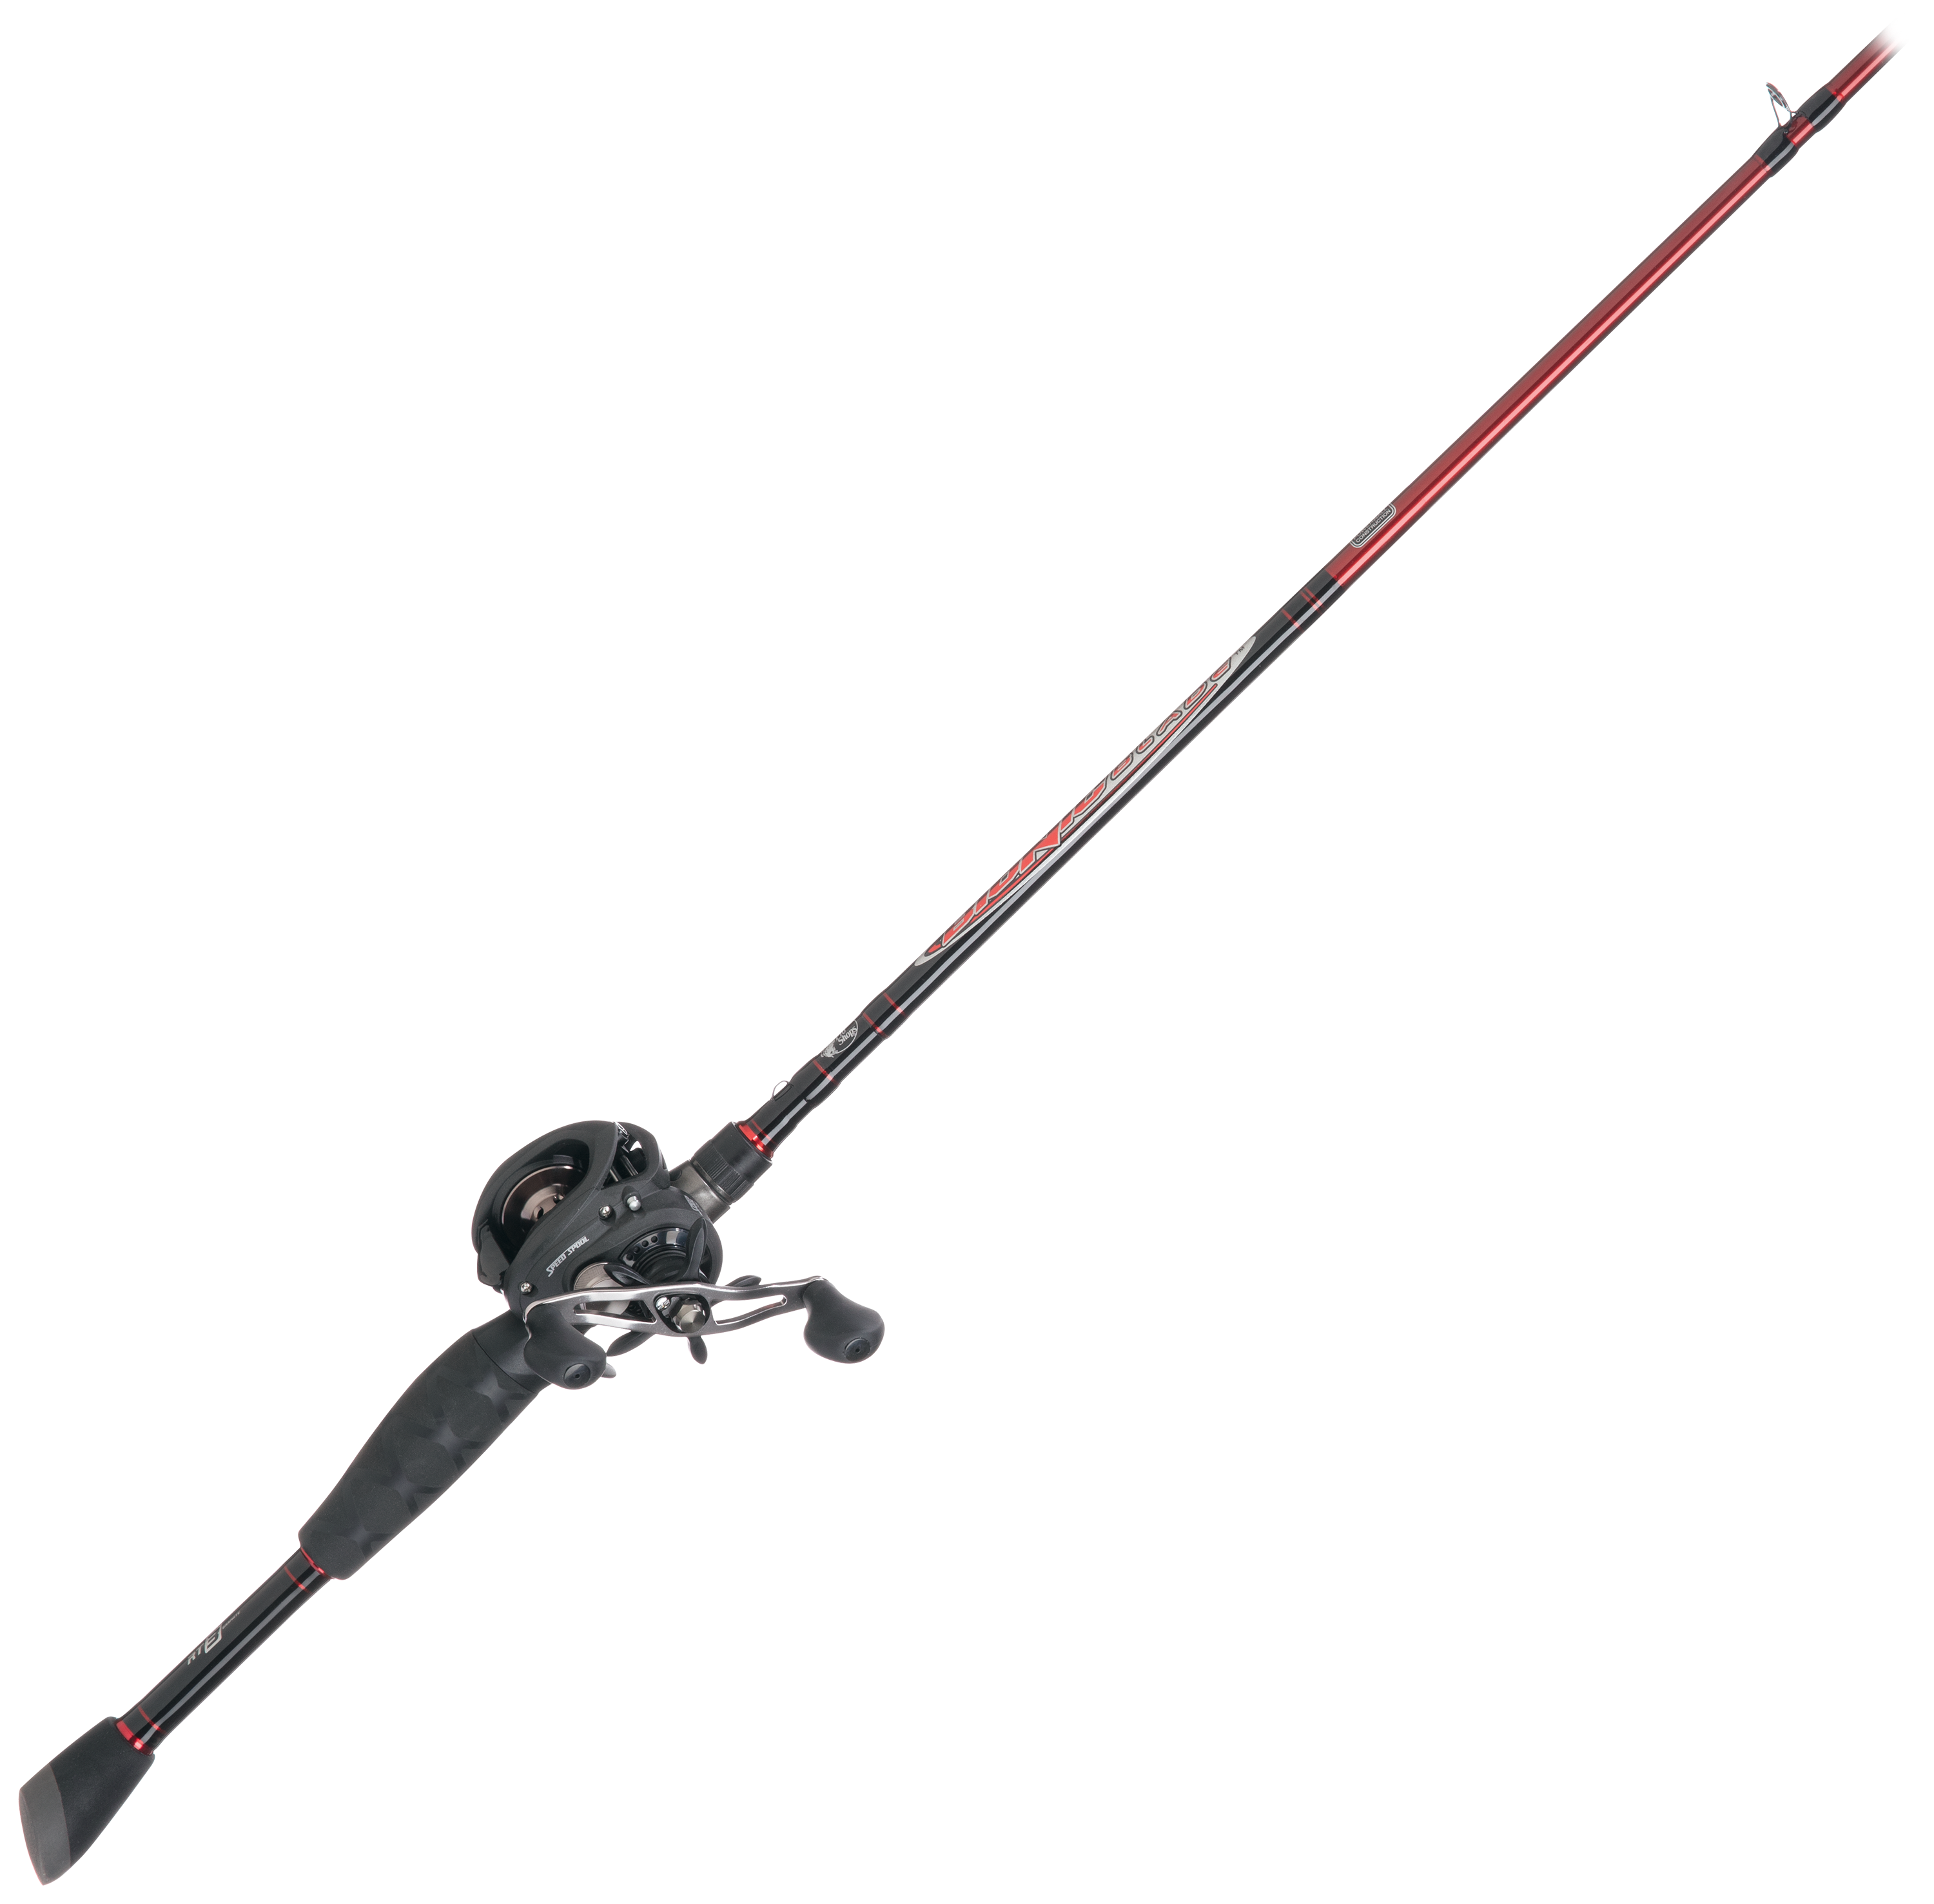 Lew's Speed Spool LFS/Bass Pro Shops XPS Bionic Blade Casting Rod And Reel Combo - Right - 7'6″ - Medium Heavy - 7.5:1